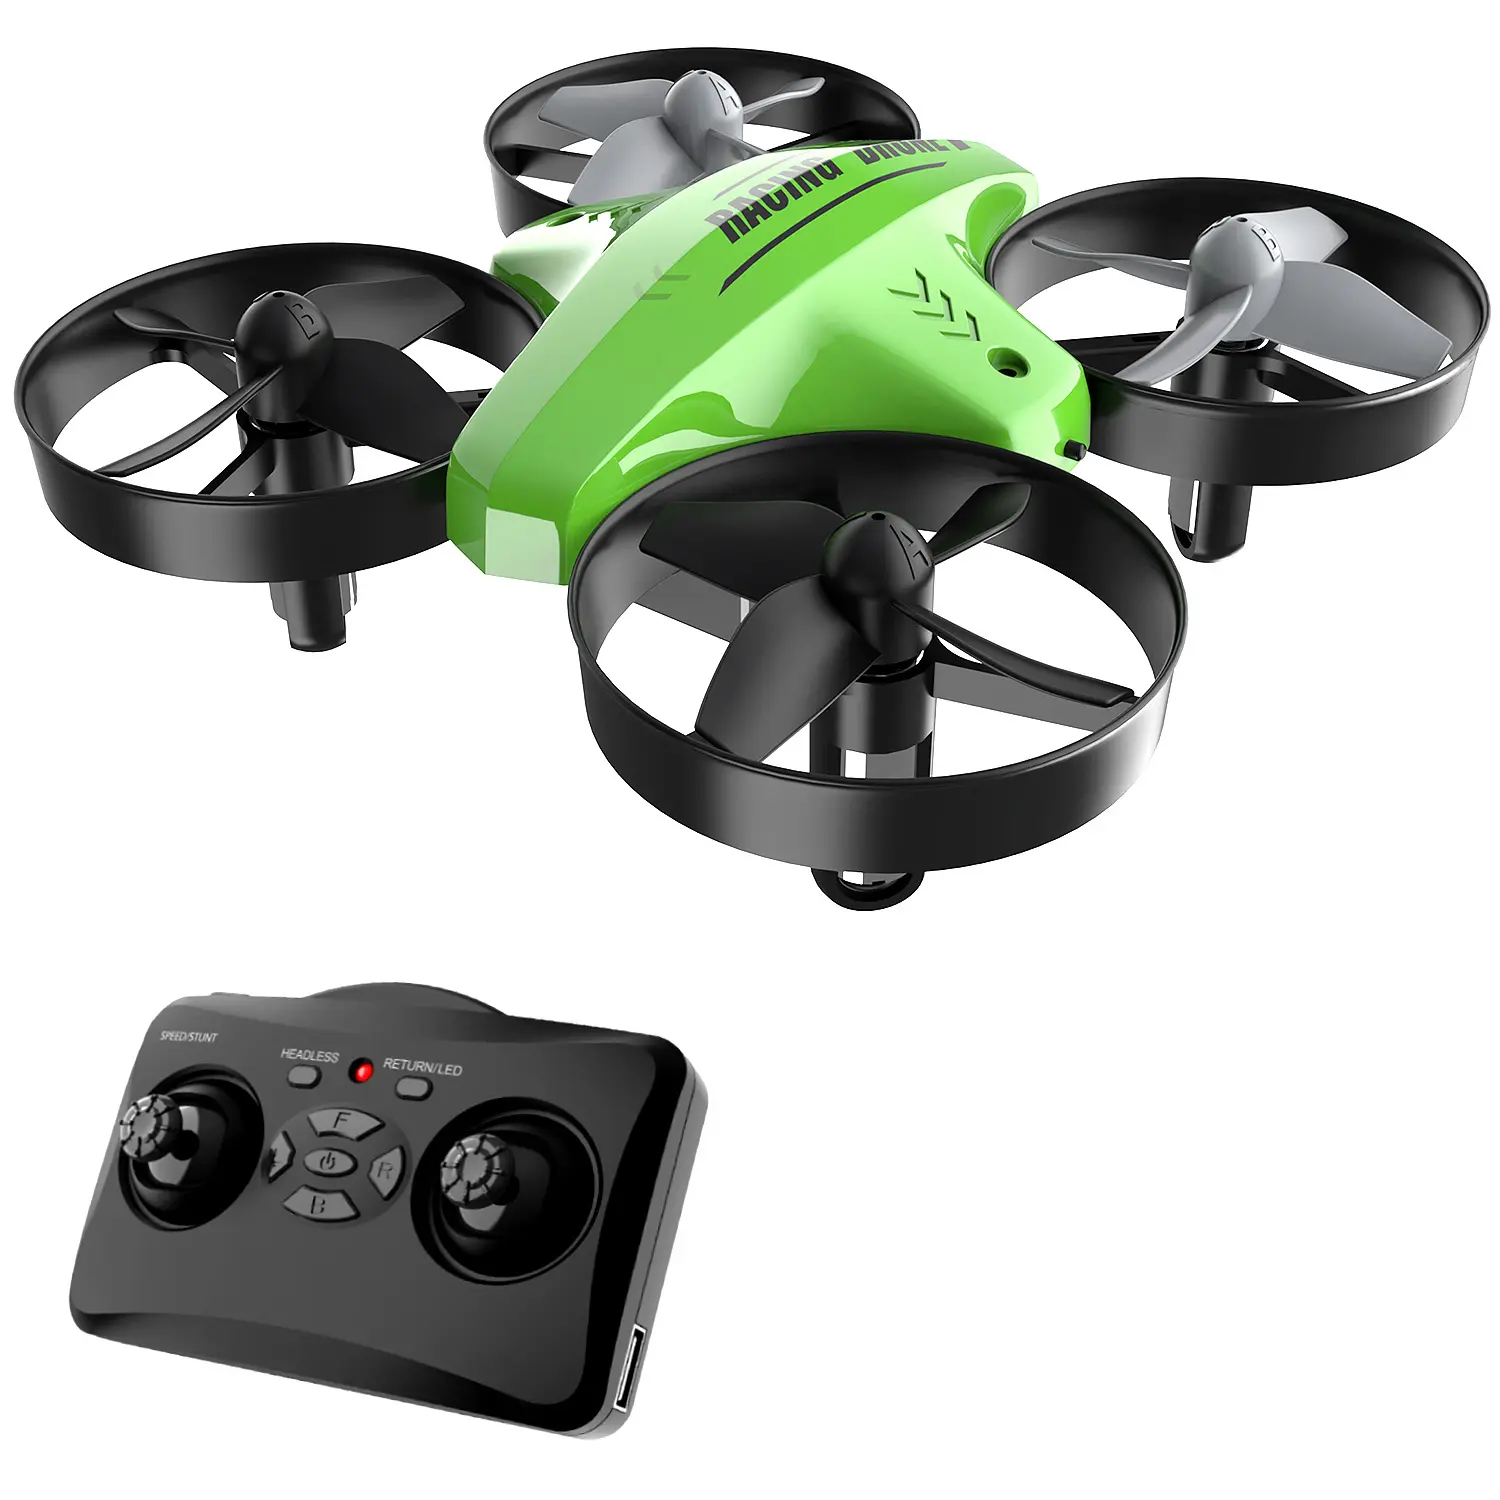 Hot Selling Fast Dispatch 2.4Ghz mini Drone rc Auto Hovering Aircraft mini Drones for kids radio control toys VS ufo dron